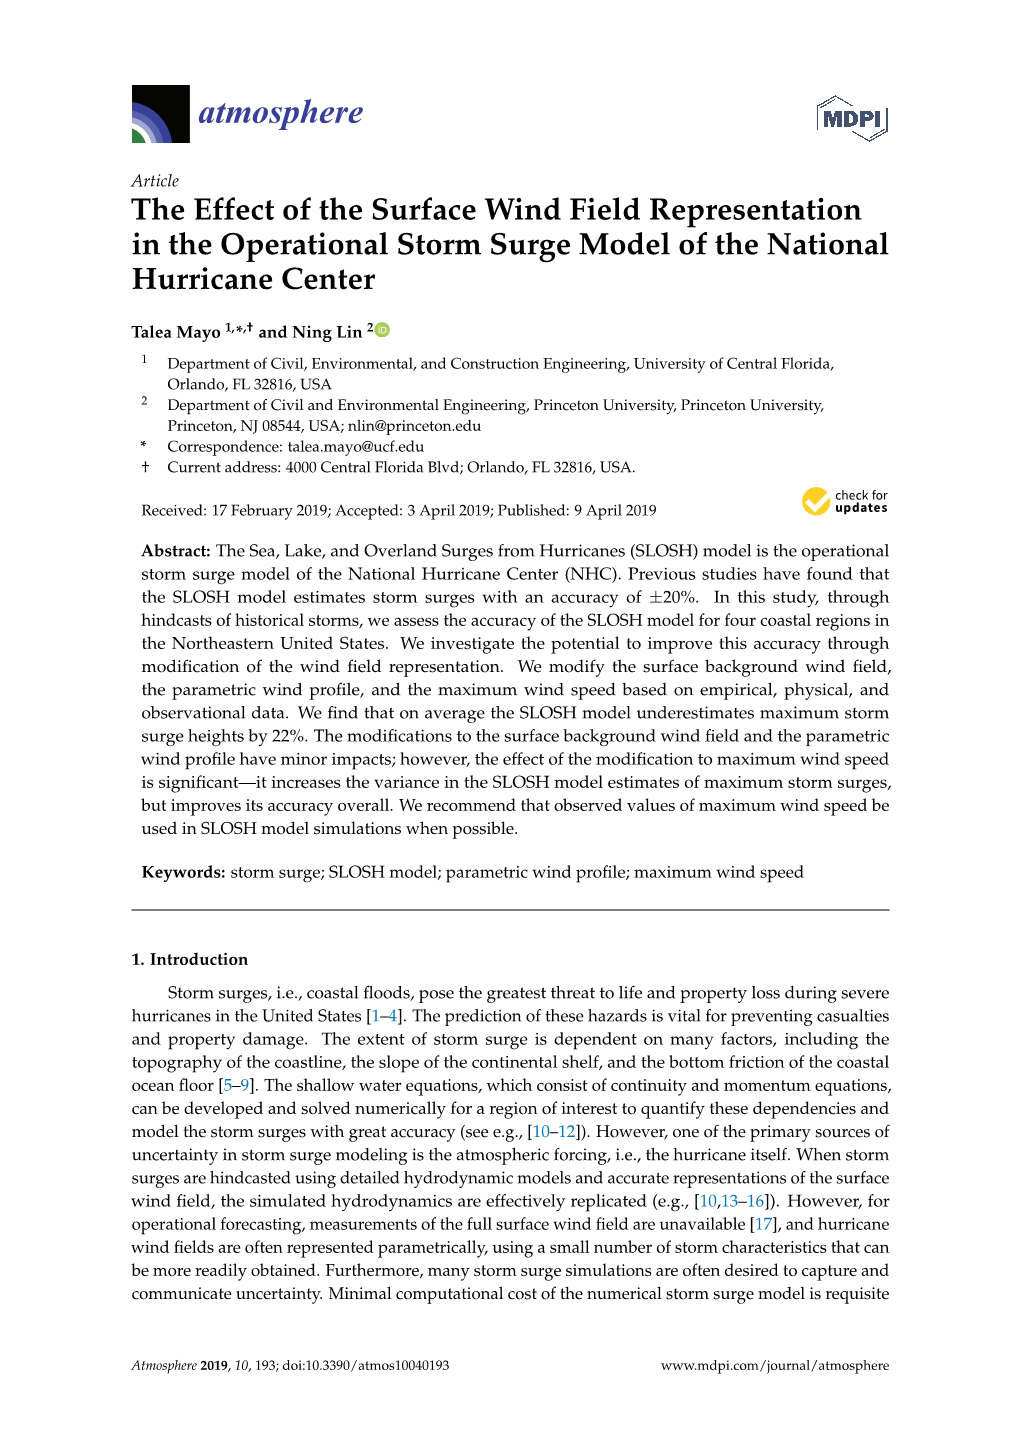 The Effect of the Surface Wind Field Representation in the Operational Storm Surge Model of the National Hurricane Center